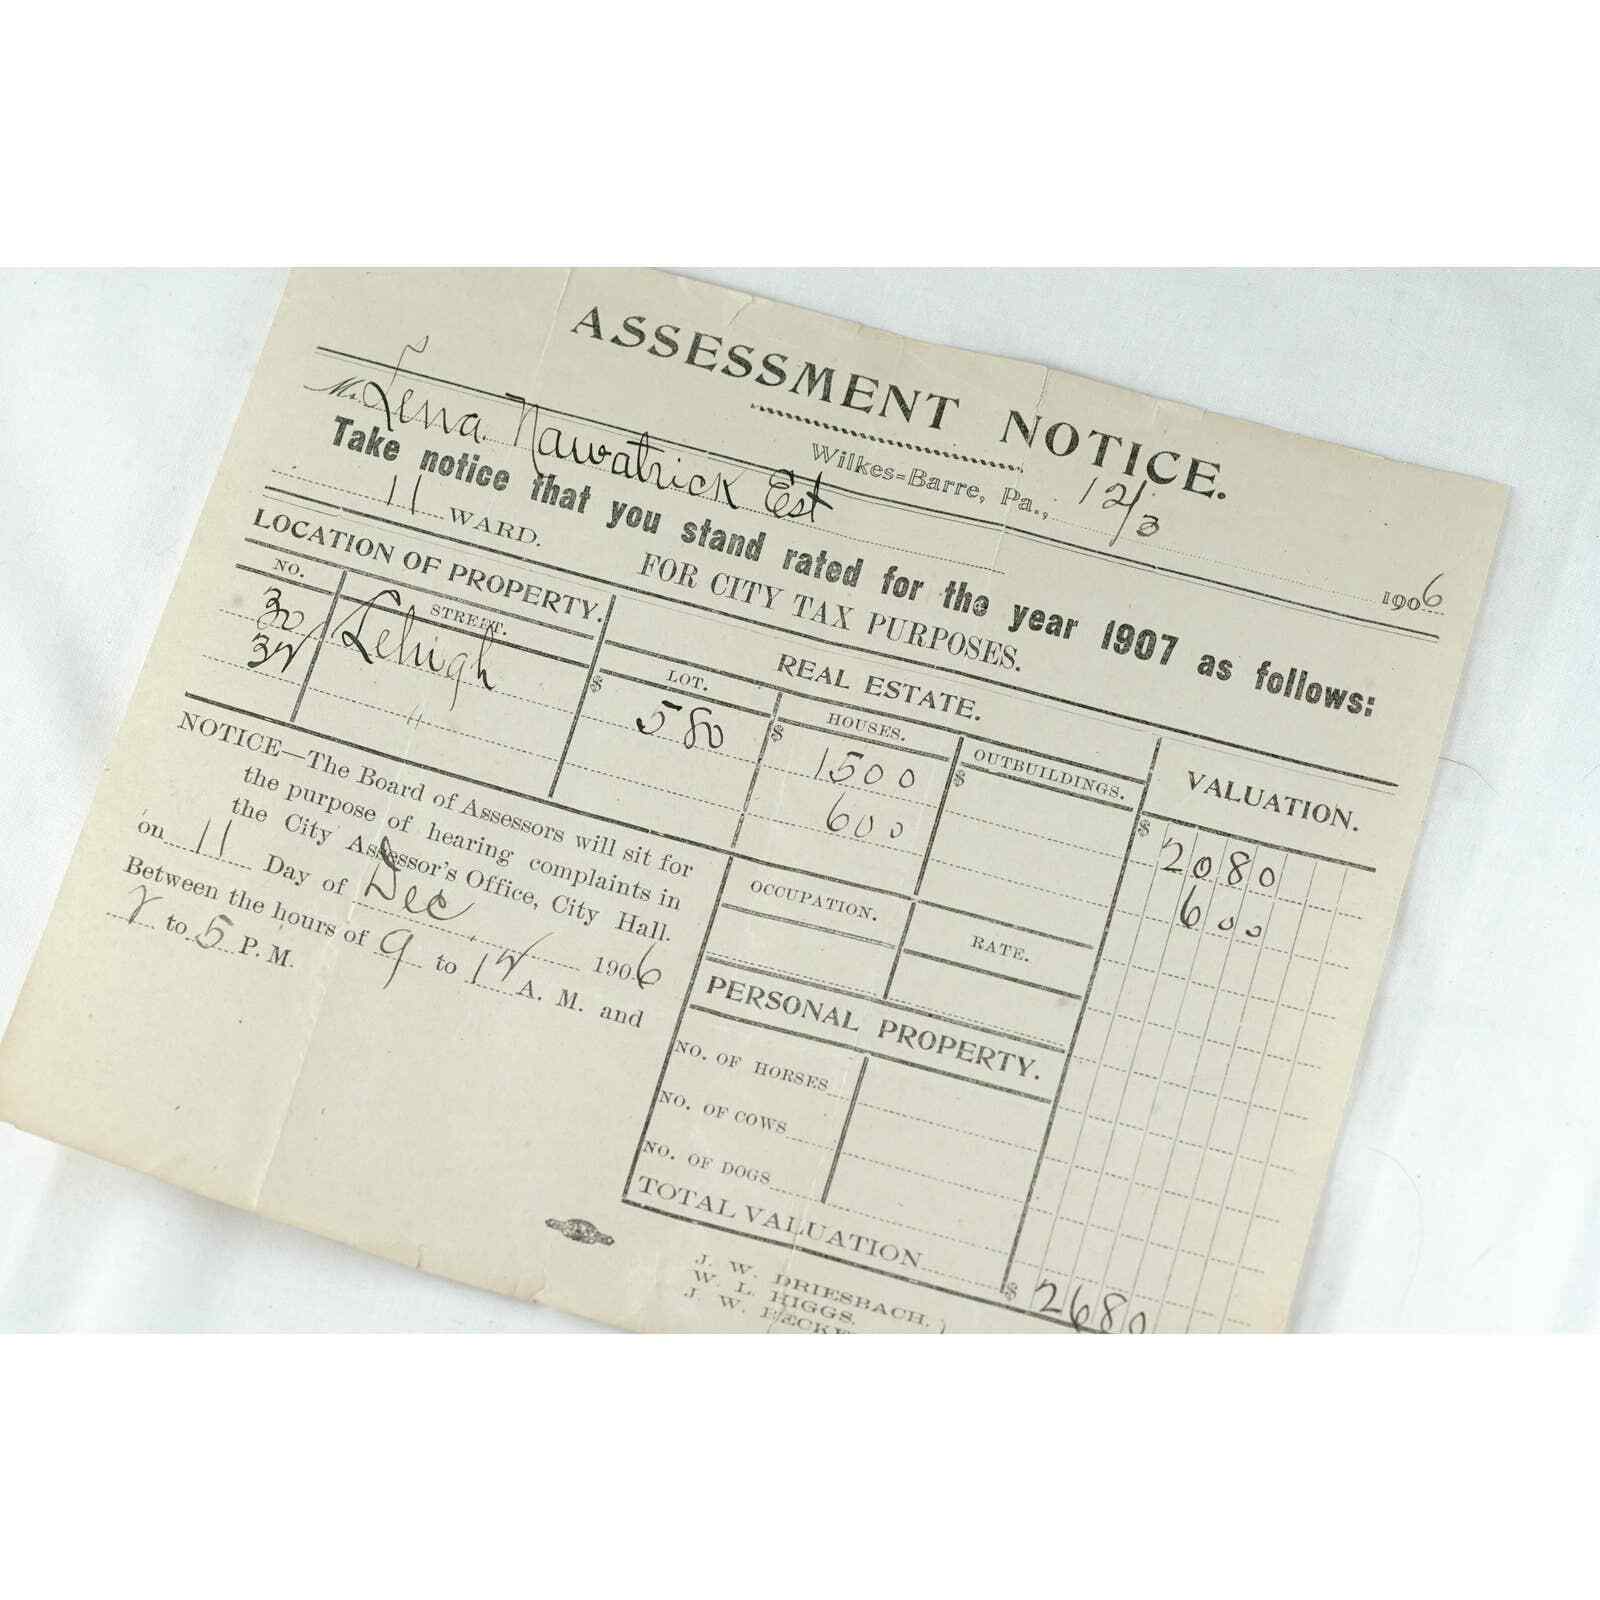 1906 Wilkes-Barre City Tax Assessment Notice For 1907, Real Estate Tax Ephemera